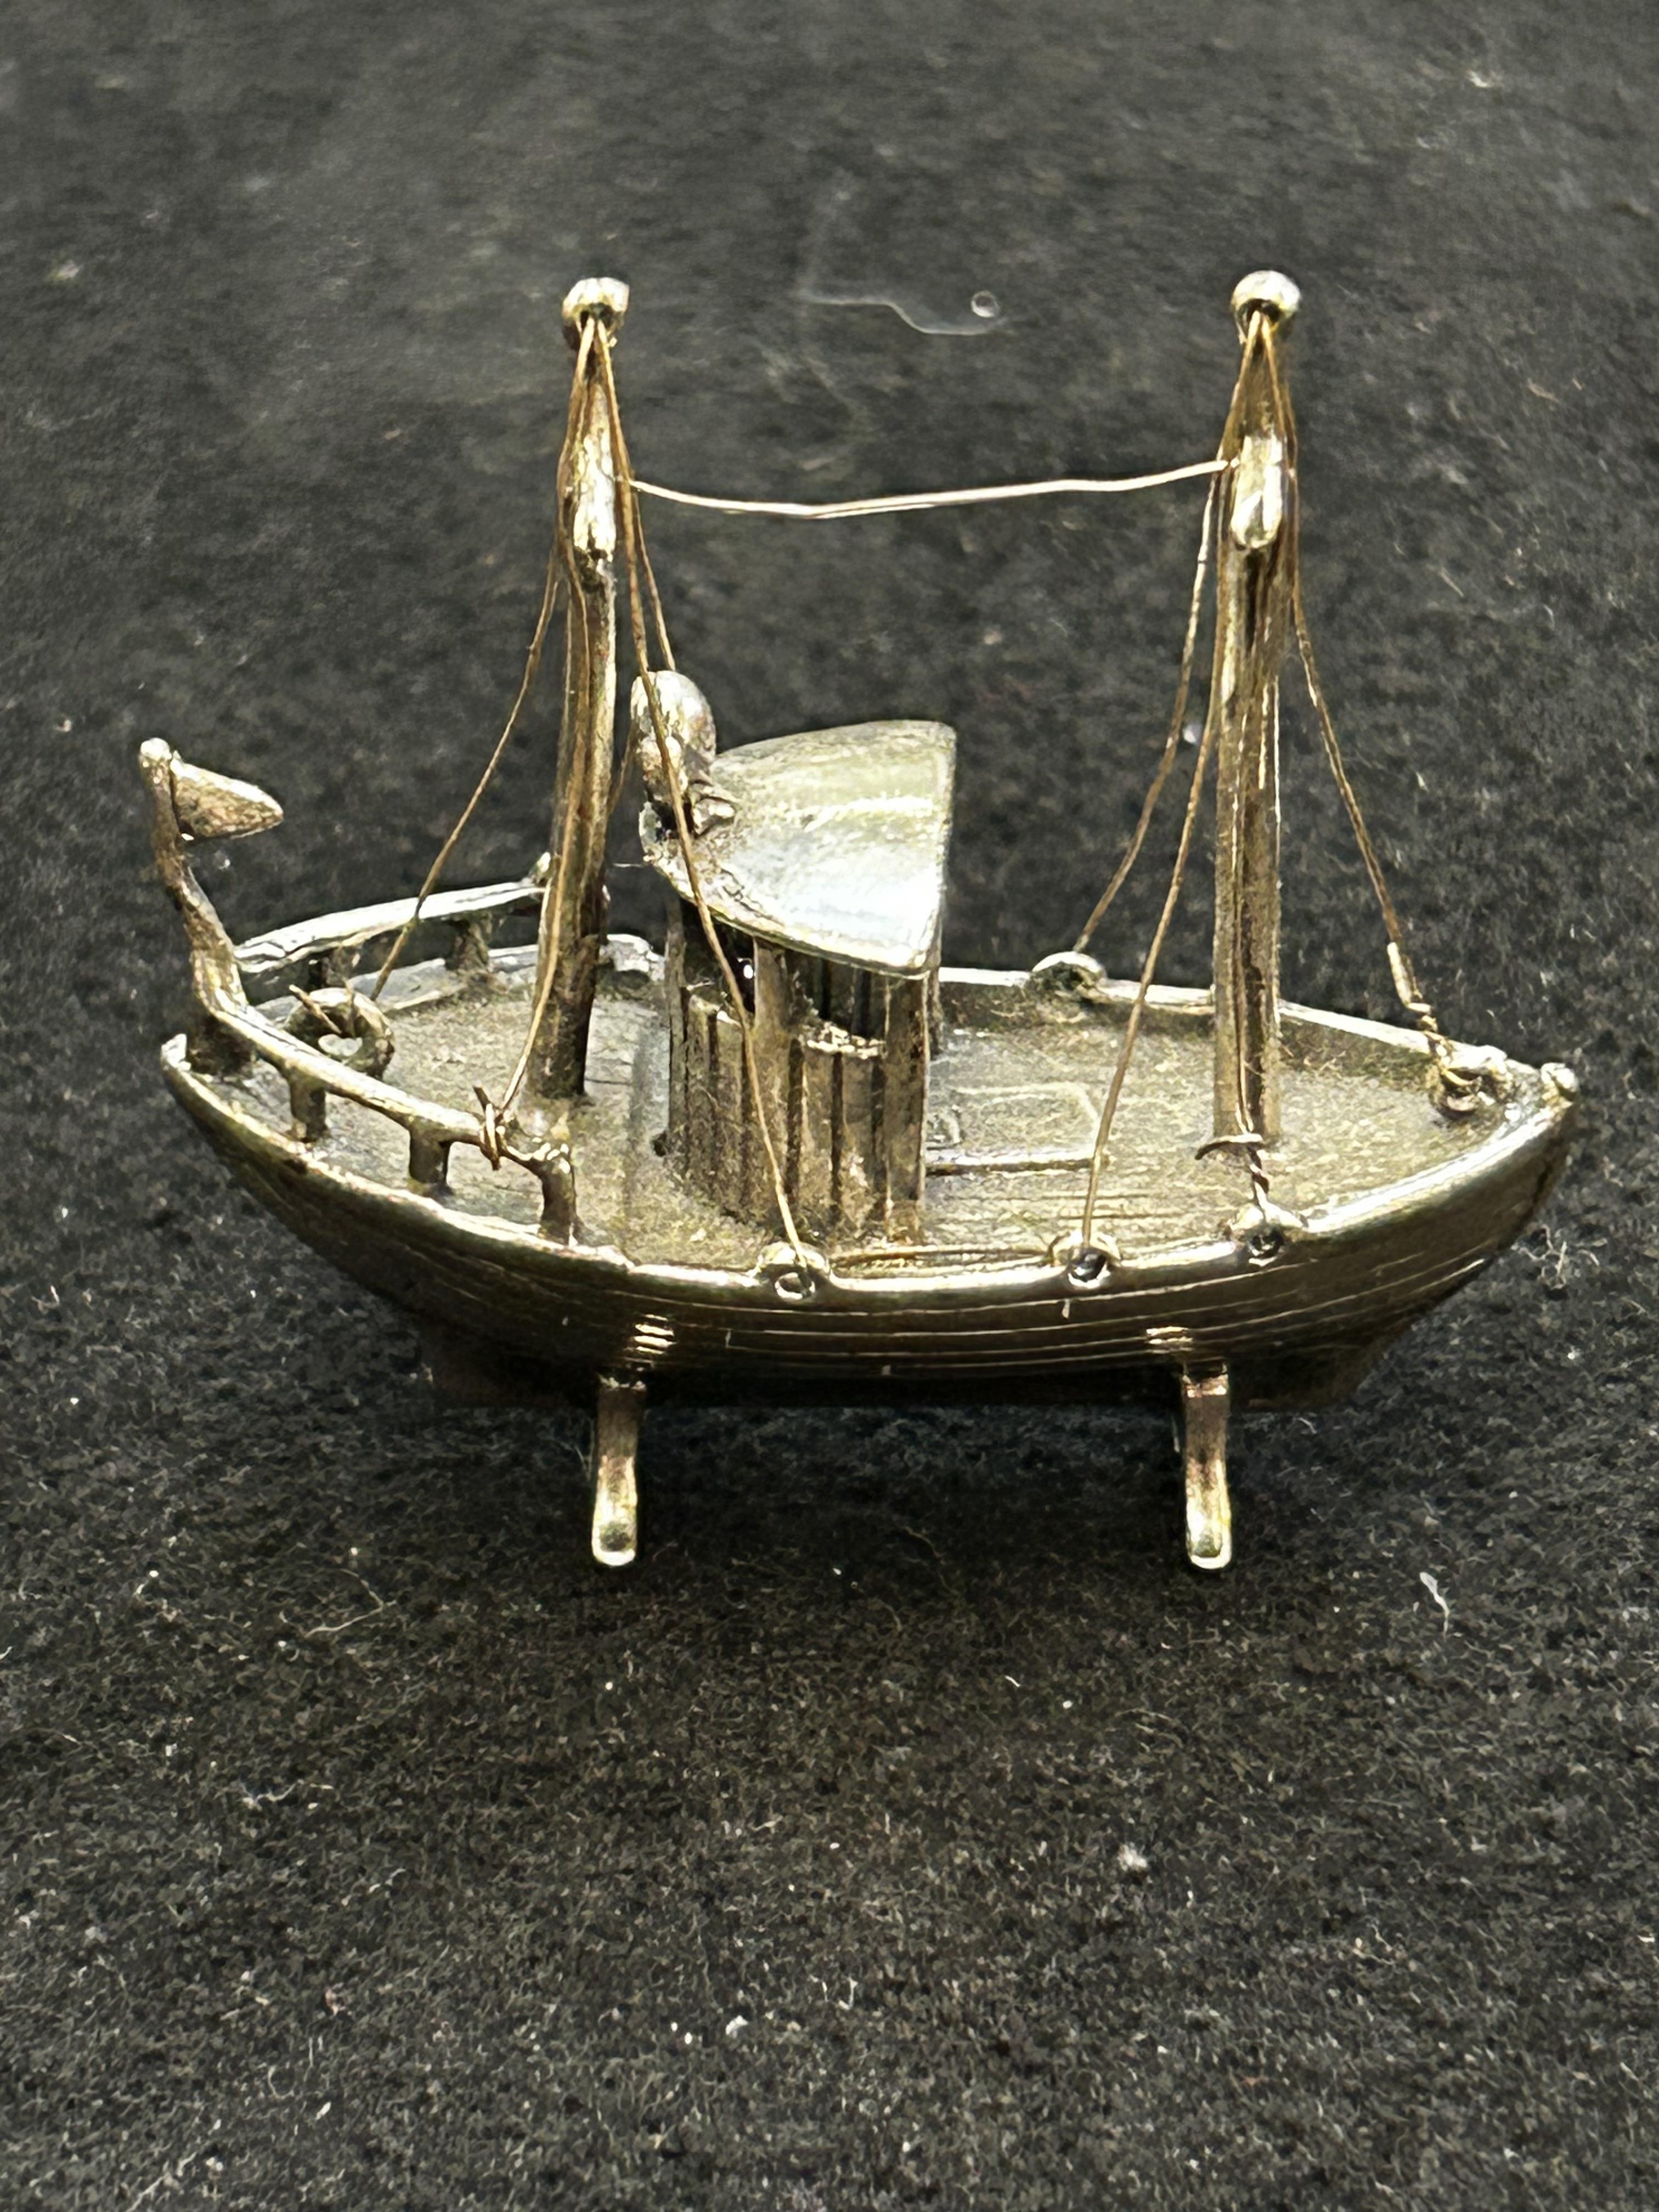 White metal boat, possibly silver